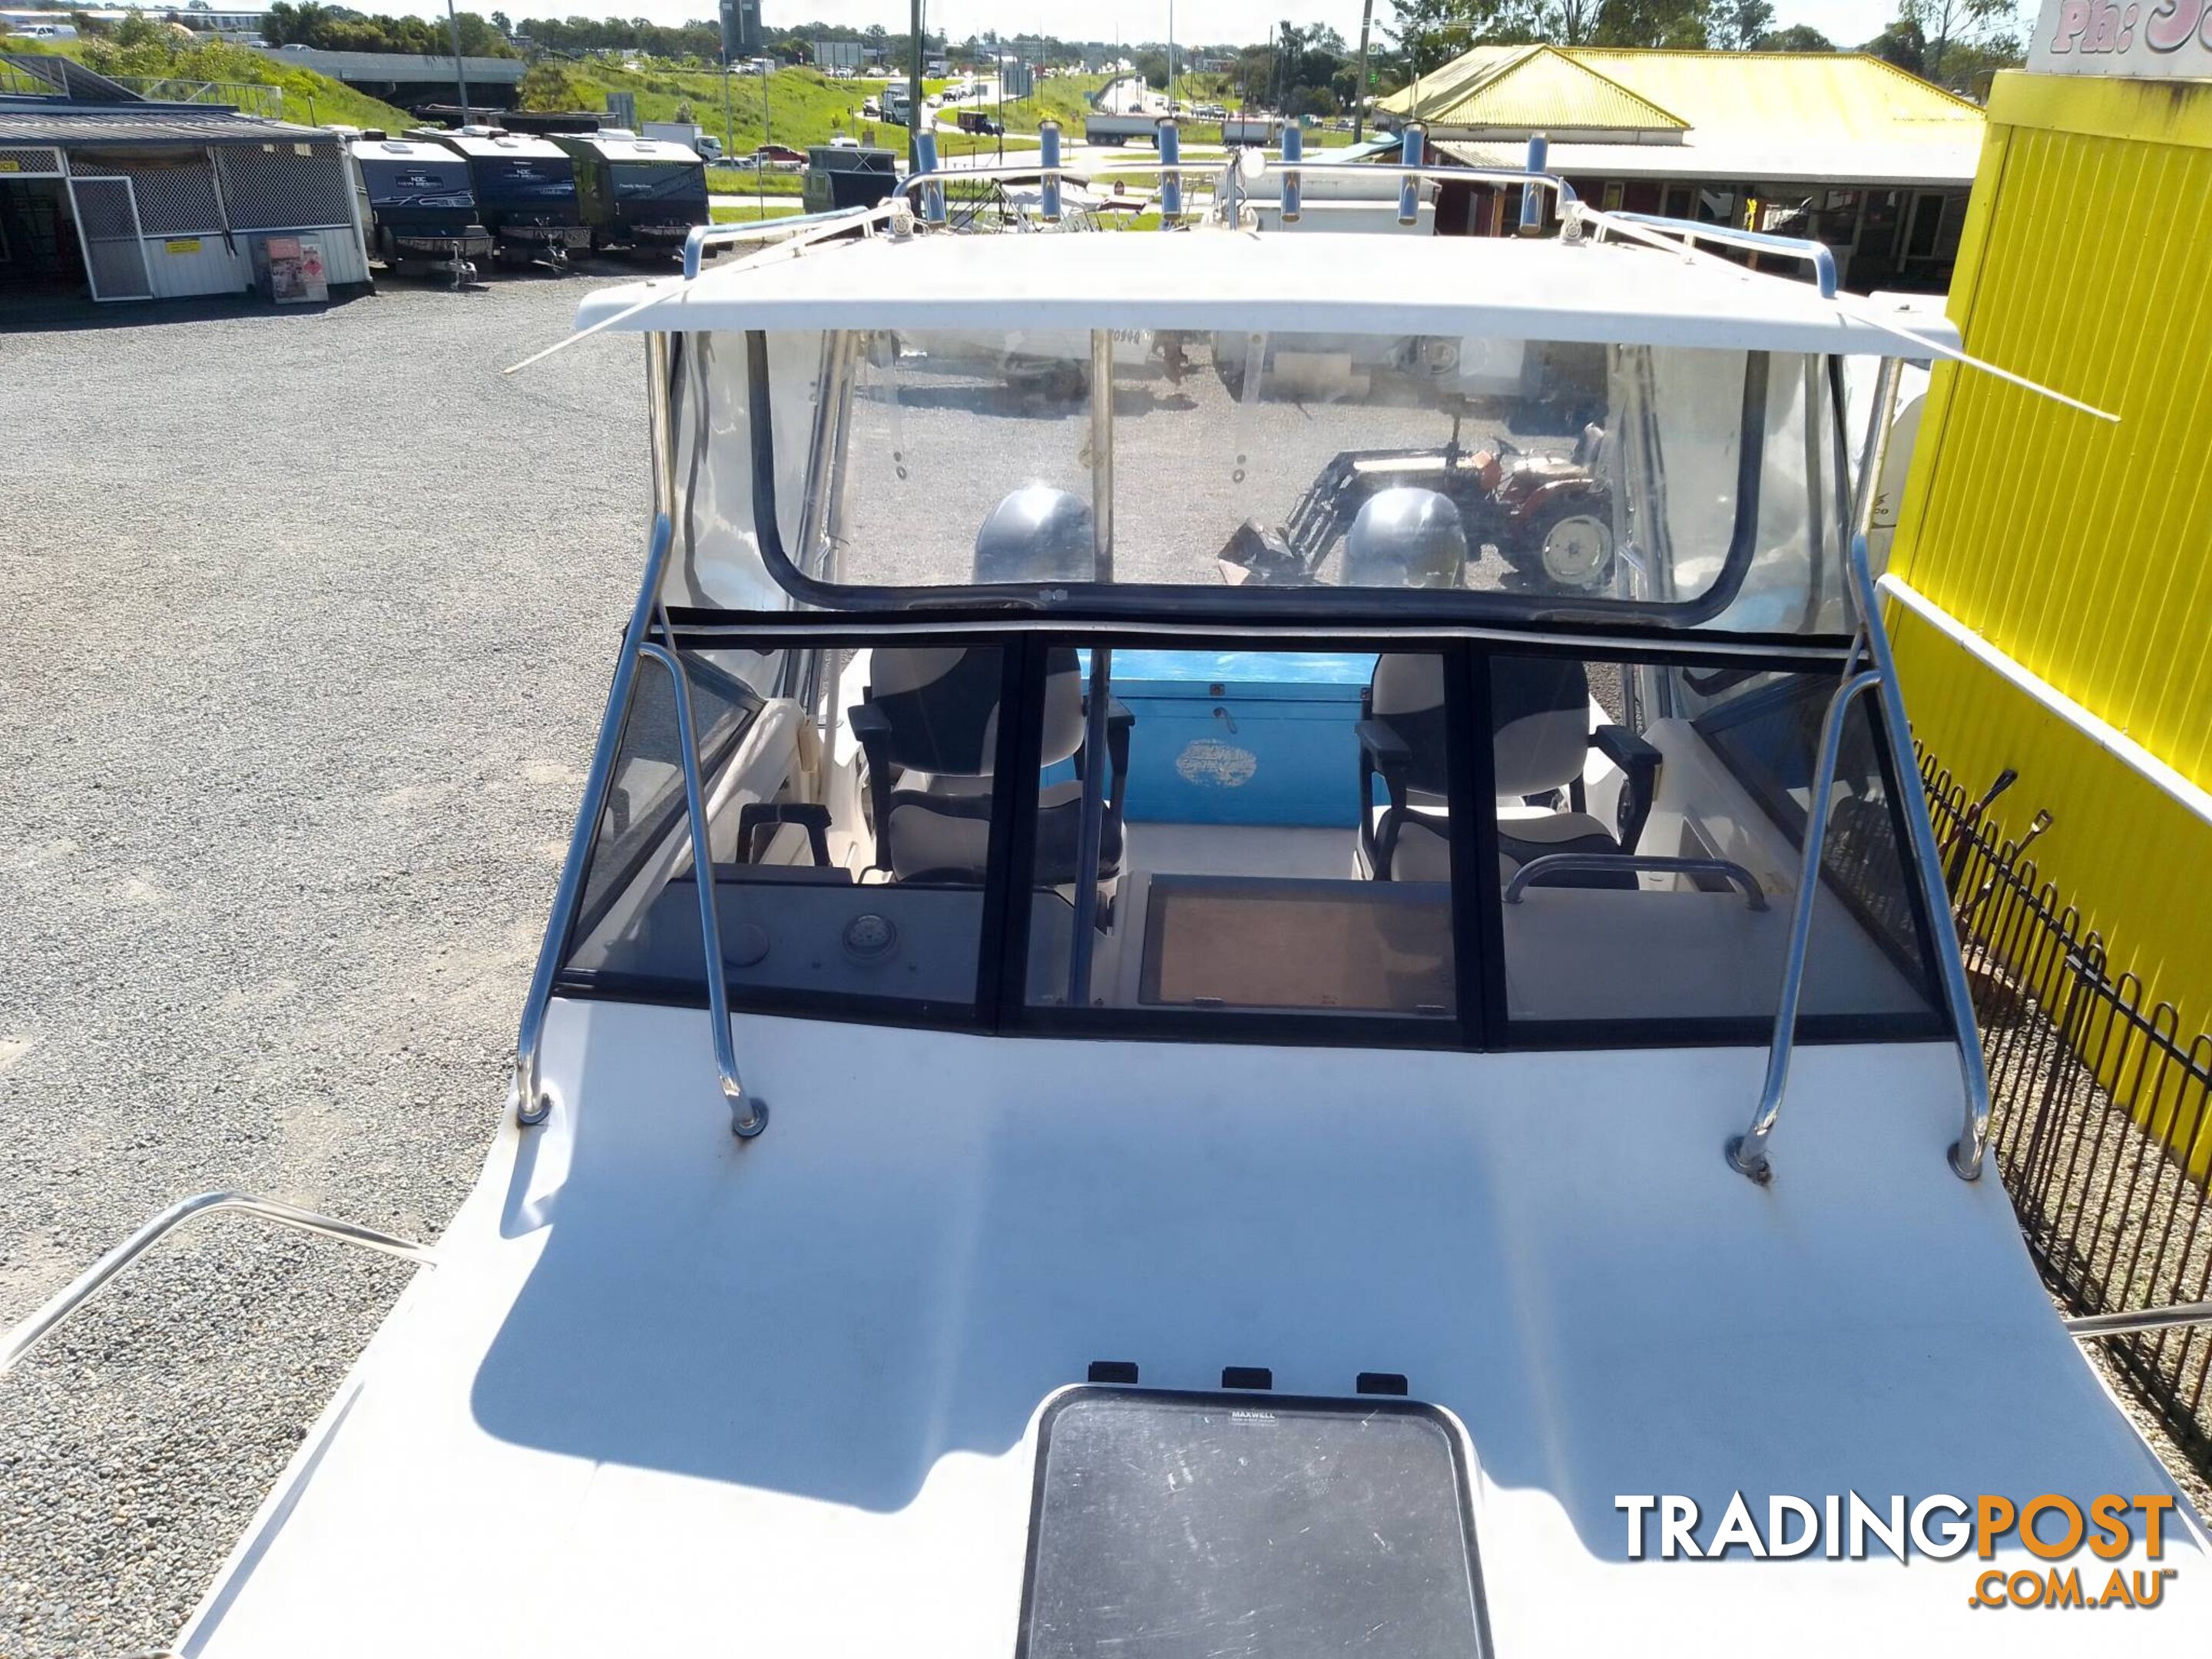 KEVLACAT 2400 OFFSHORE HALF CABIN-TWIN 150HP YAMAHA 4 STROKES AND ALLOY TRAILER